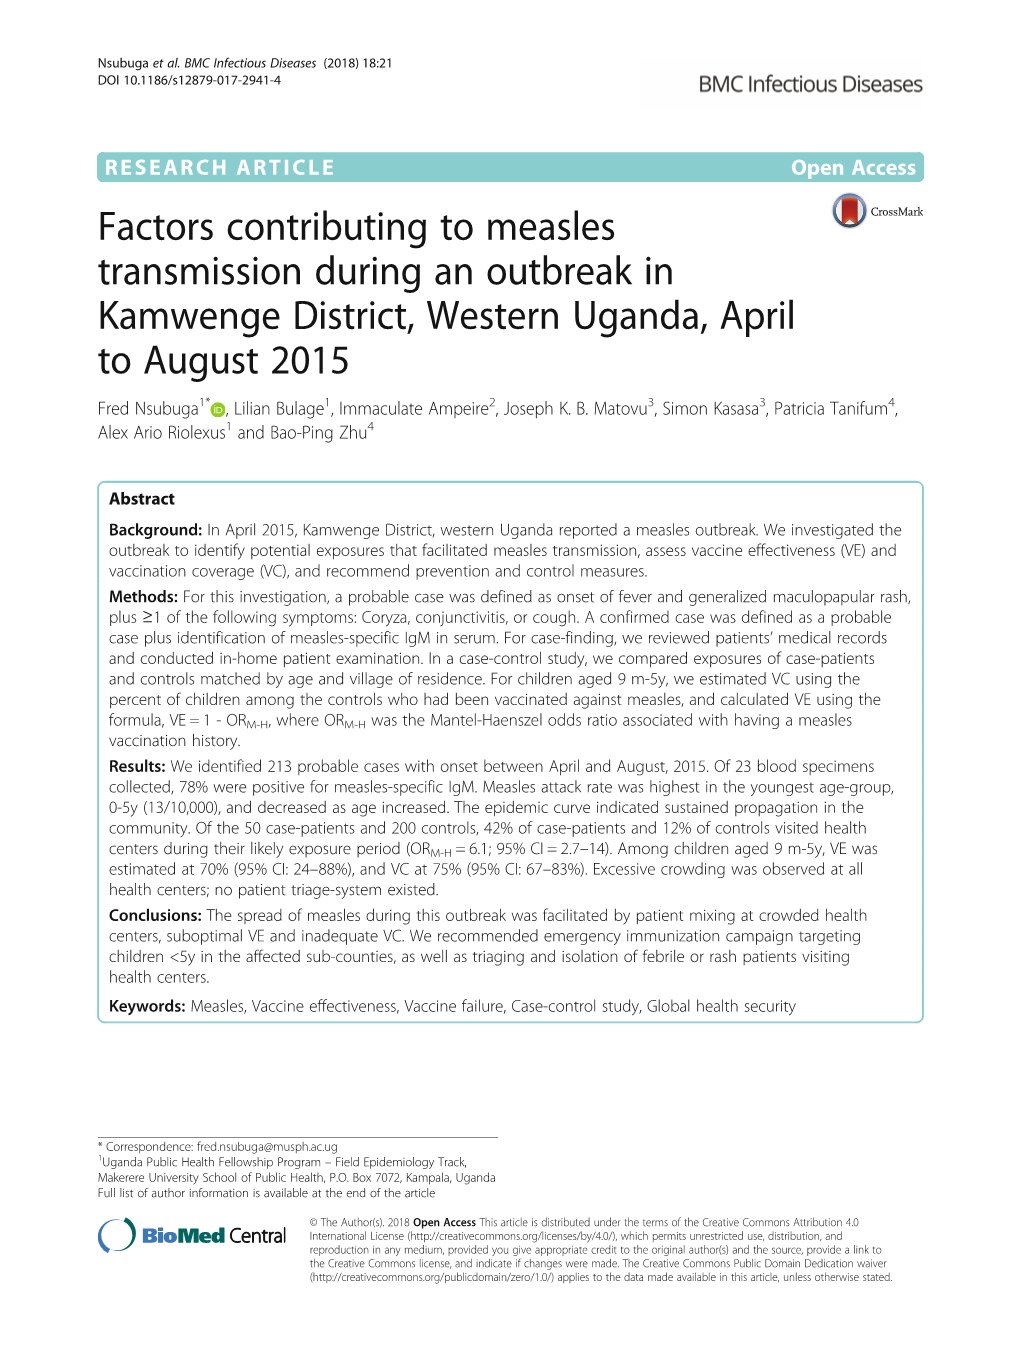 Factors Contributing to Measles Transmission During an Outbreak In